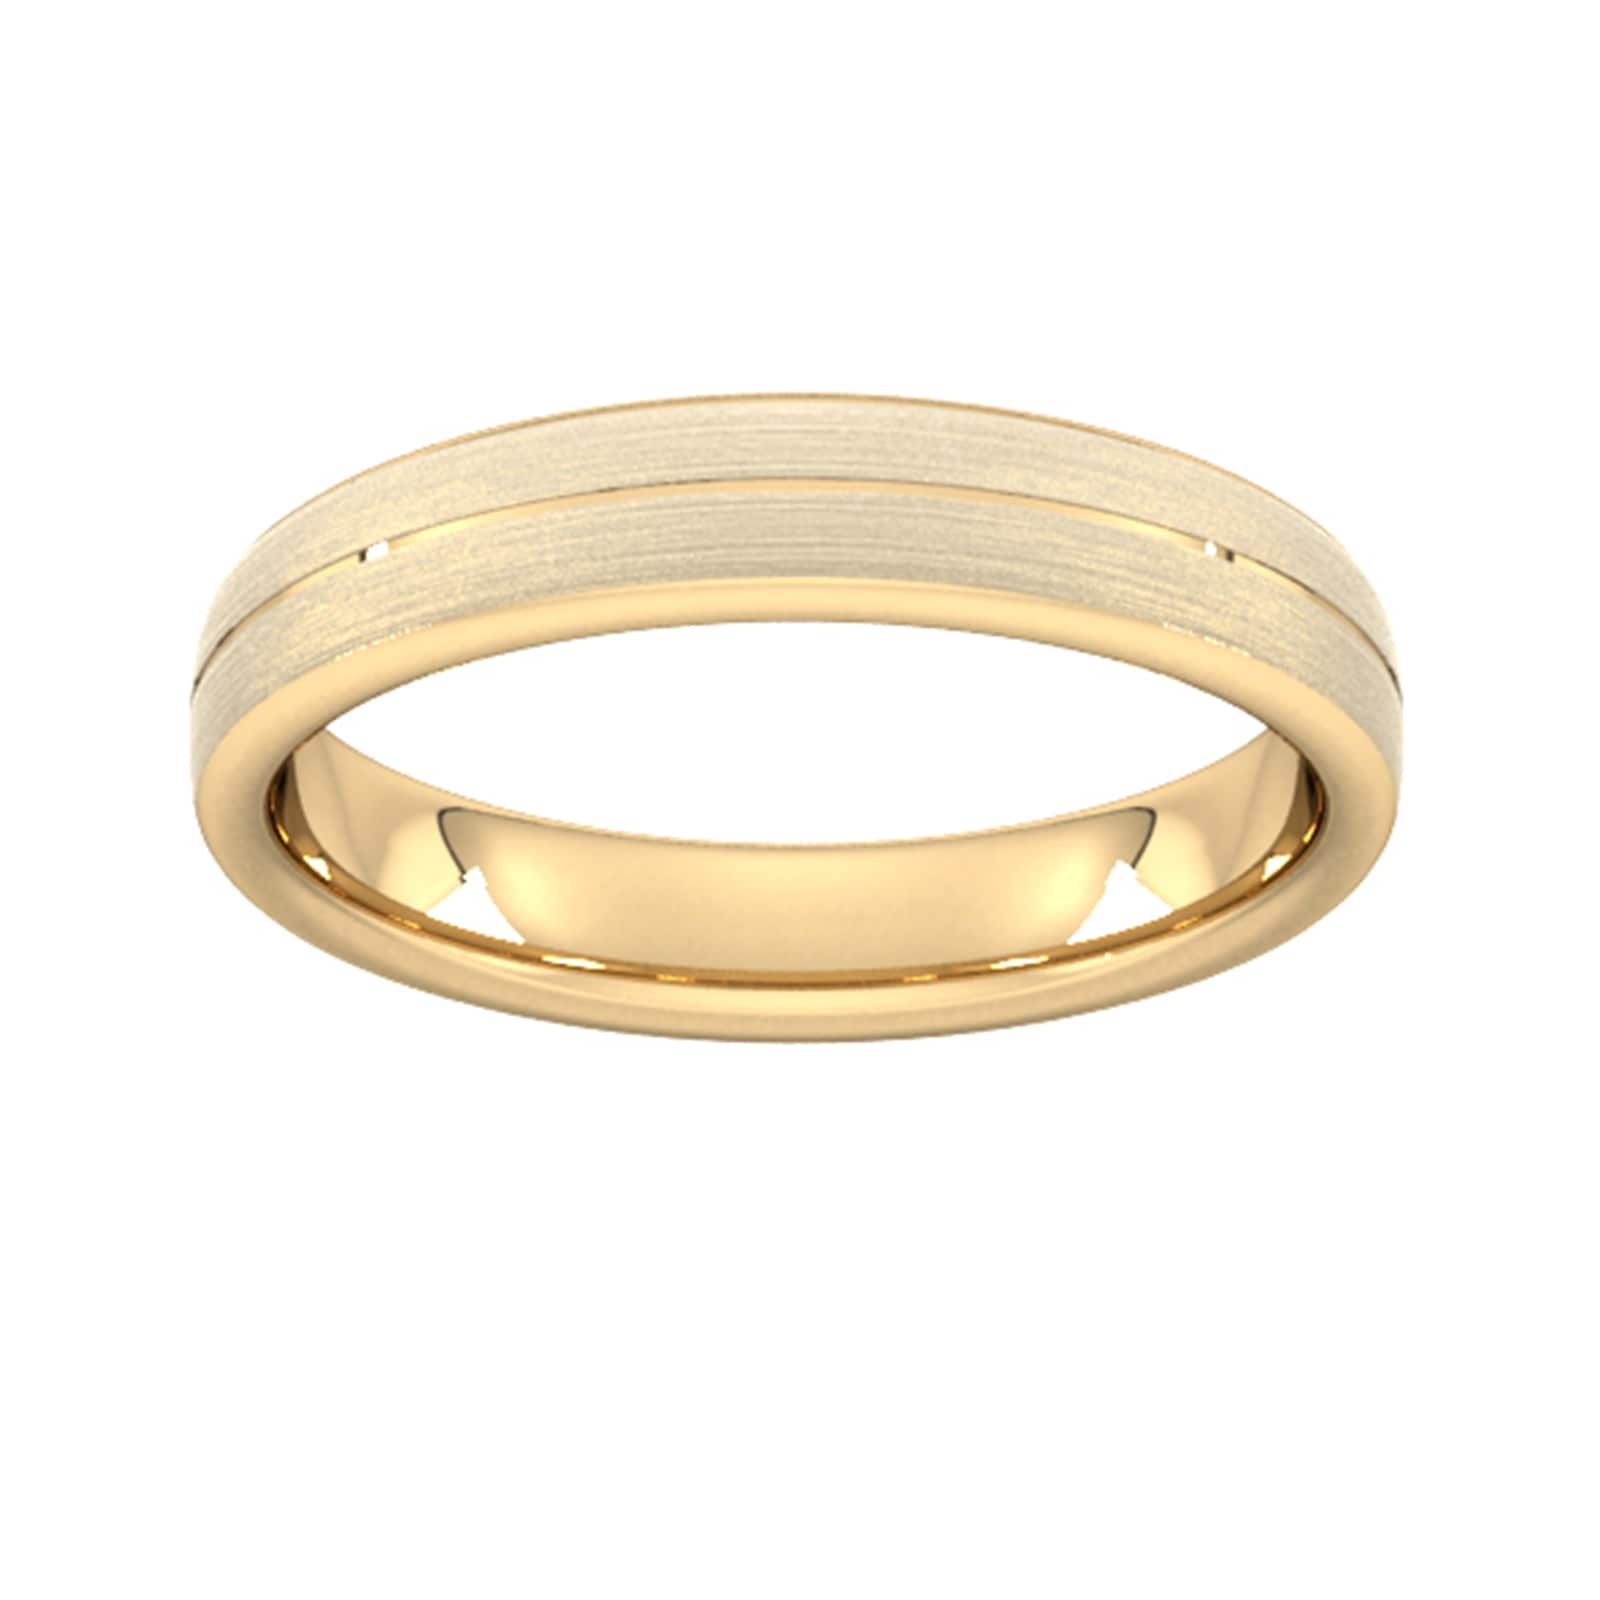 4mm Slight Court Heavy Centre Groove With Chamfered Edge Wedding Ring In 18 Carat Yellow Gold - Ring Size Z